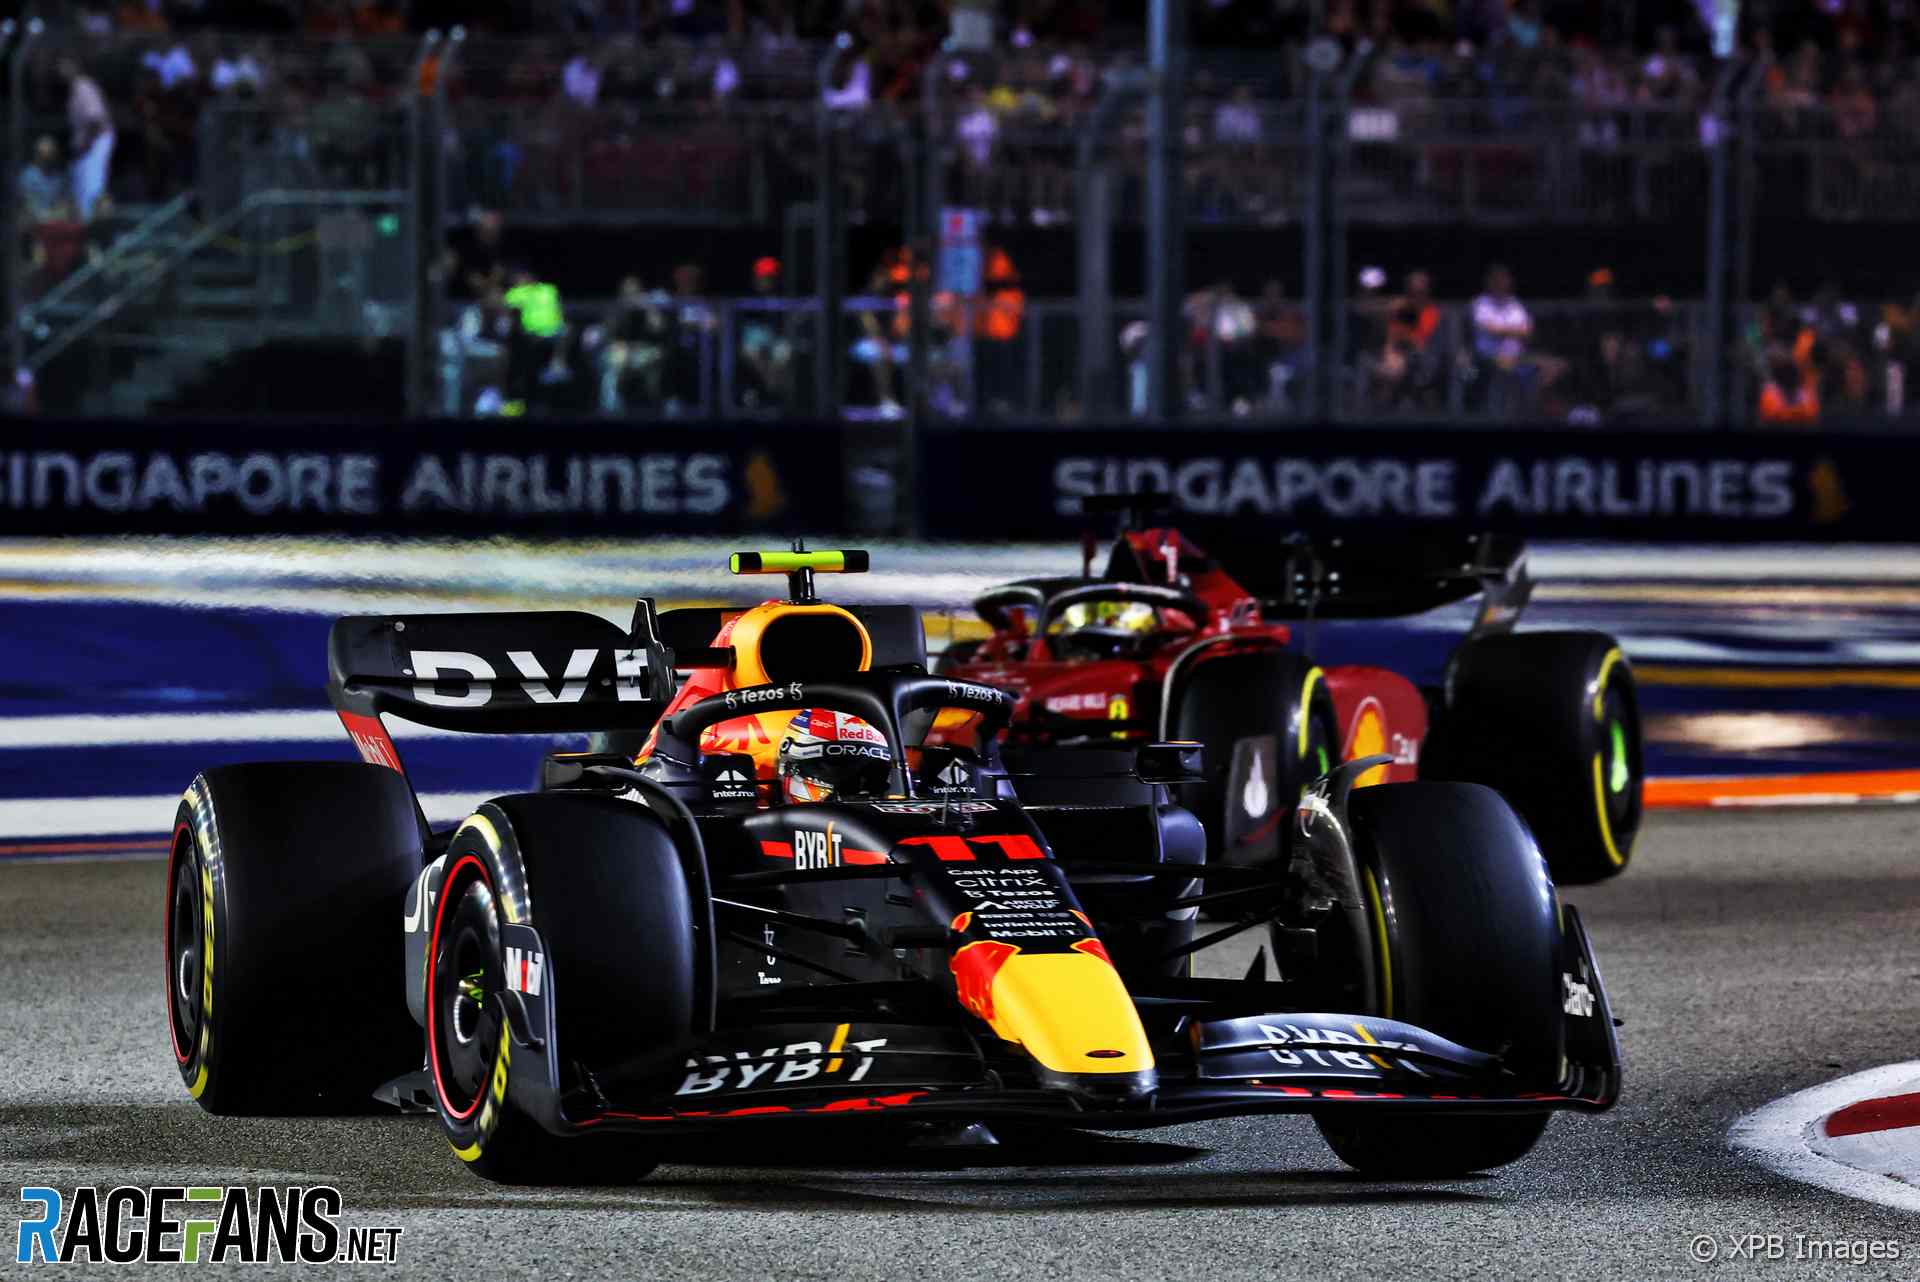 The 2022 Singapore Grand Prix was held at Singapore and won by Sergio Perez